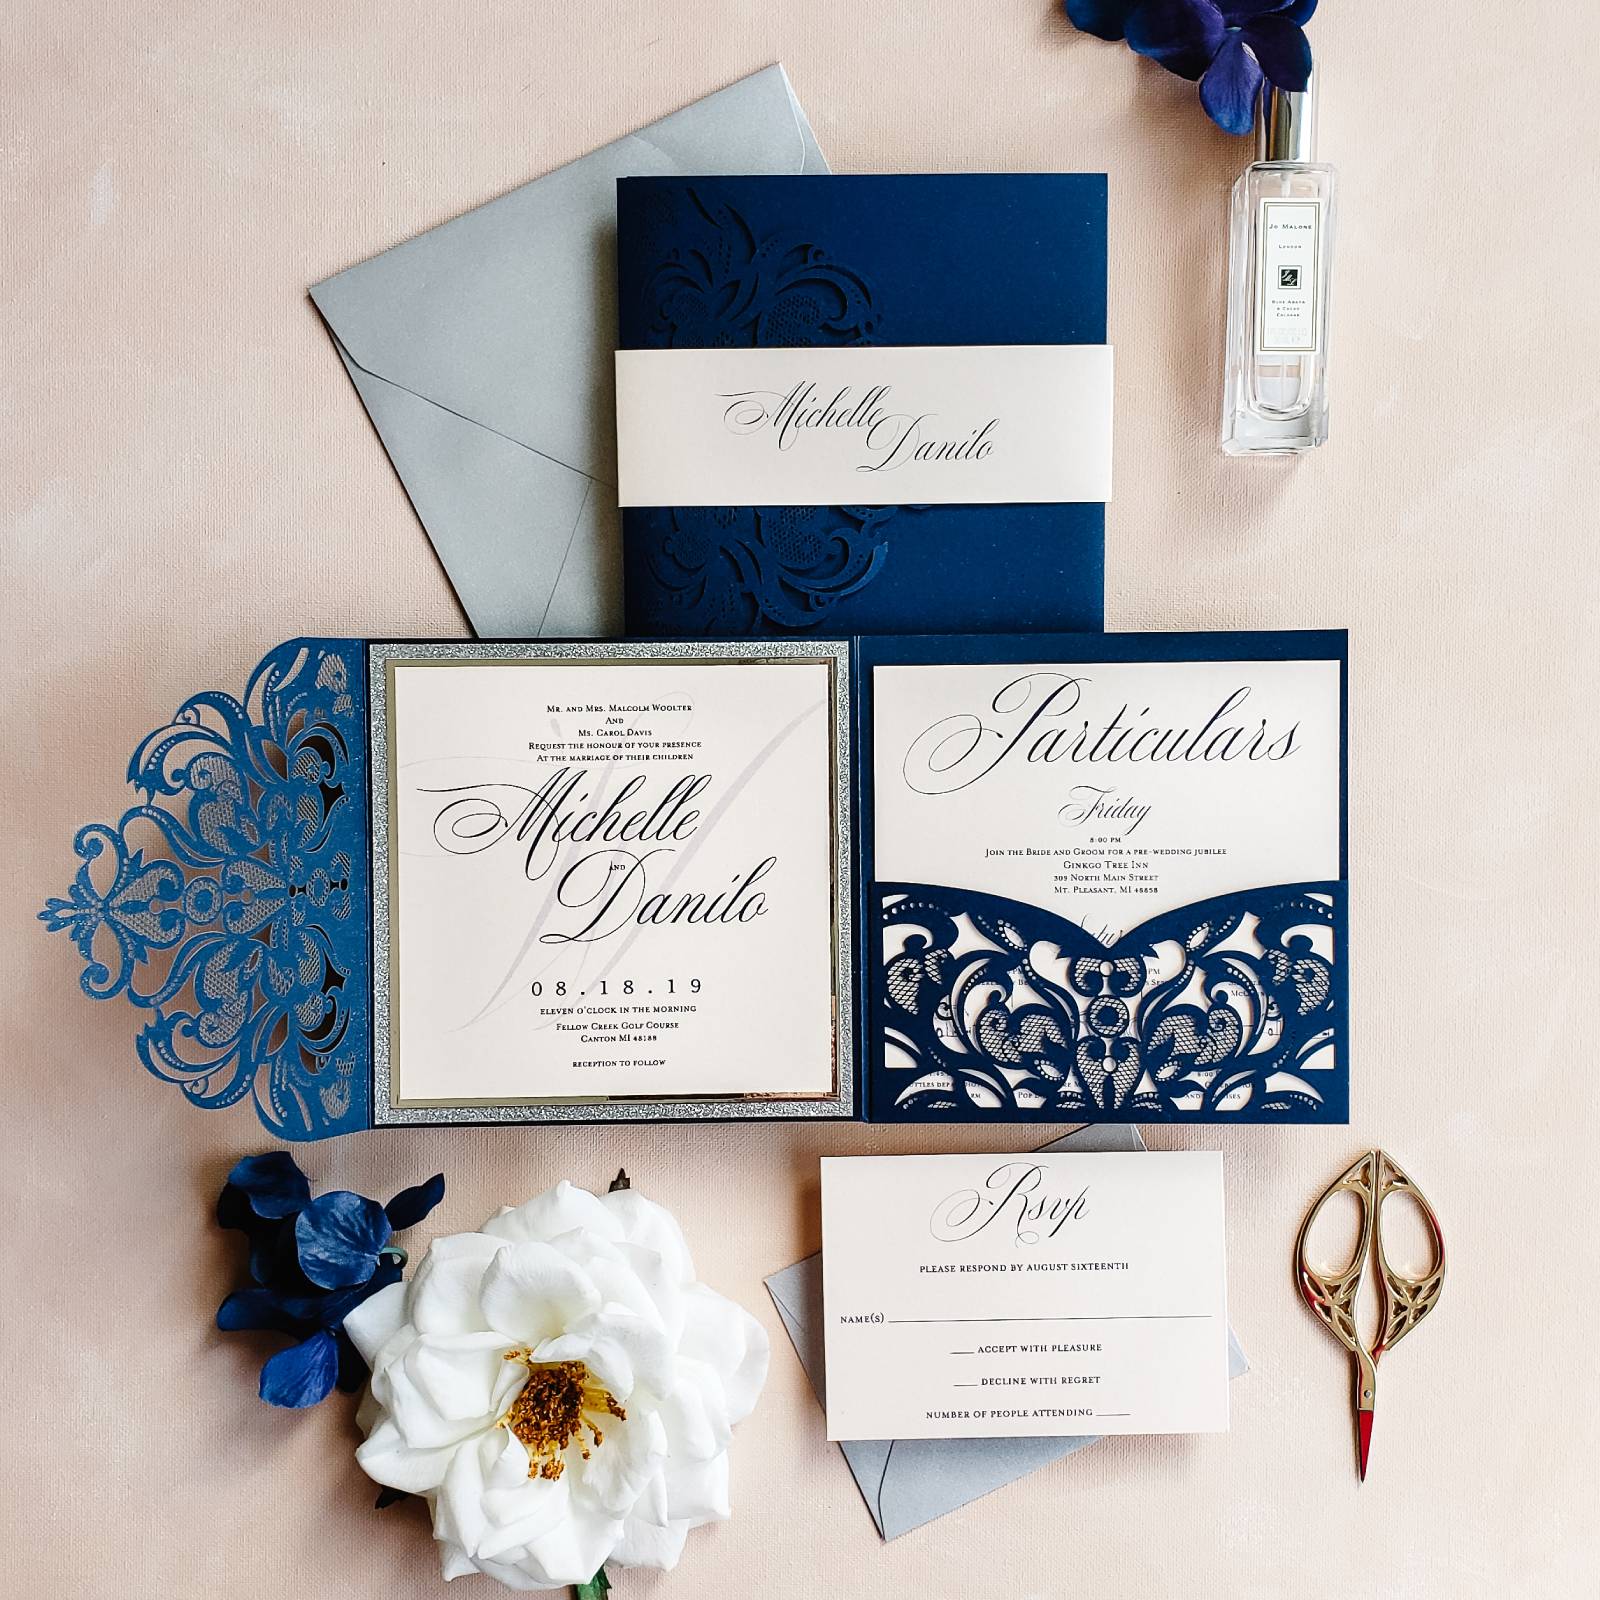 [vc_row][vc_column][vc_column_text]Purchase this listing to get a sample of our Everlasting wedding invitation suite.

The sample includes:

• 5.9